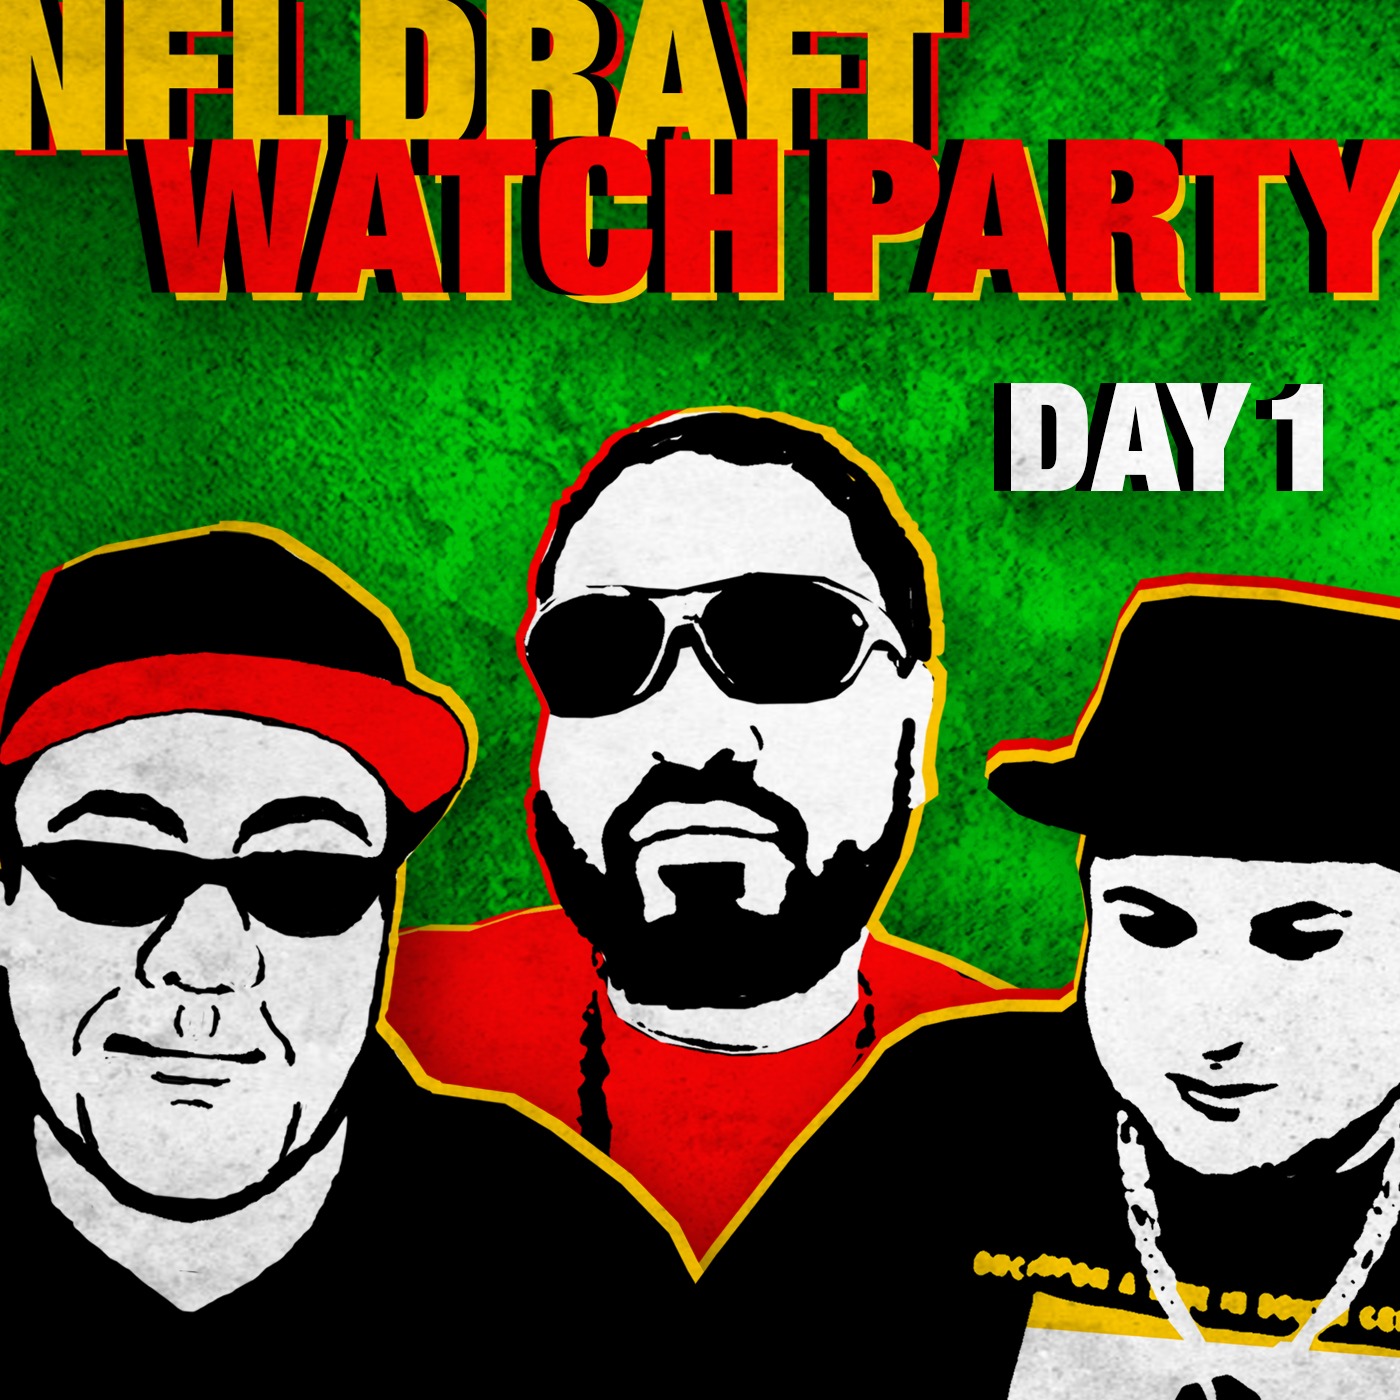 Round 1 2022 NFL Draft Coverage, Live on Location Image